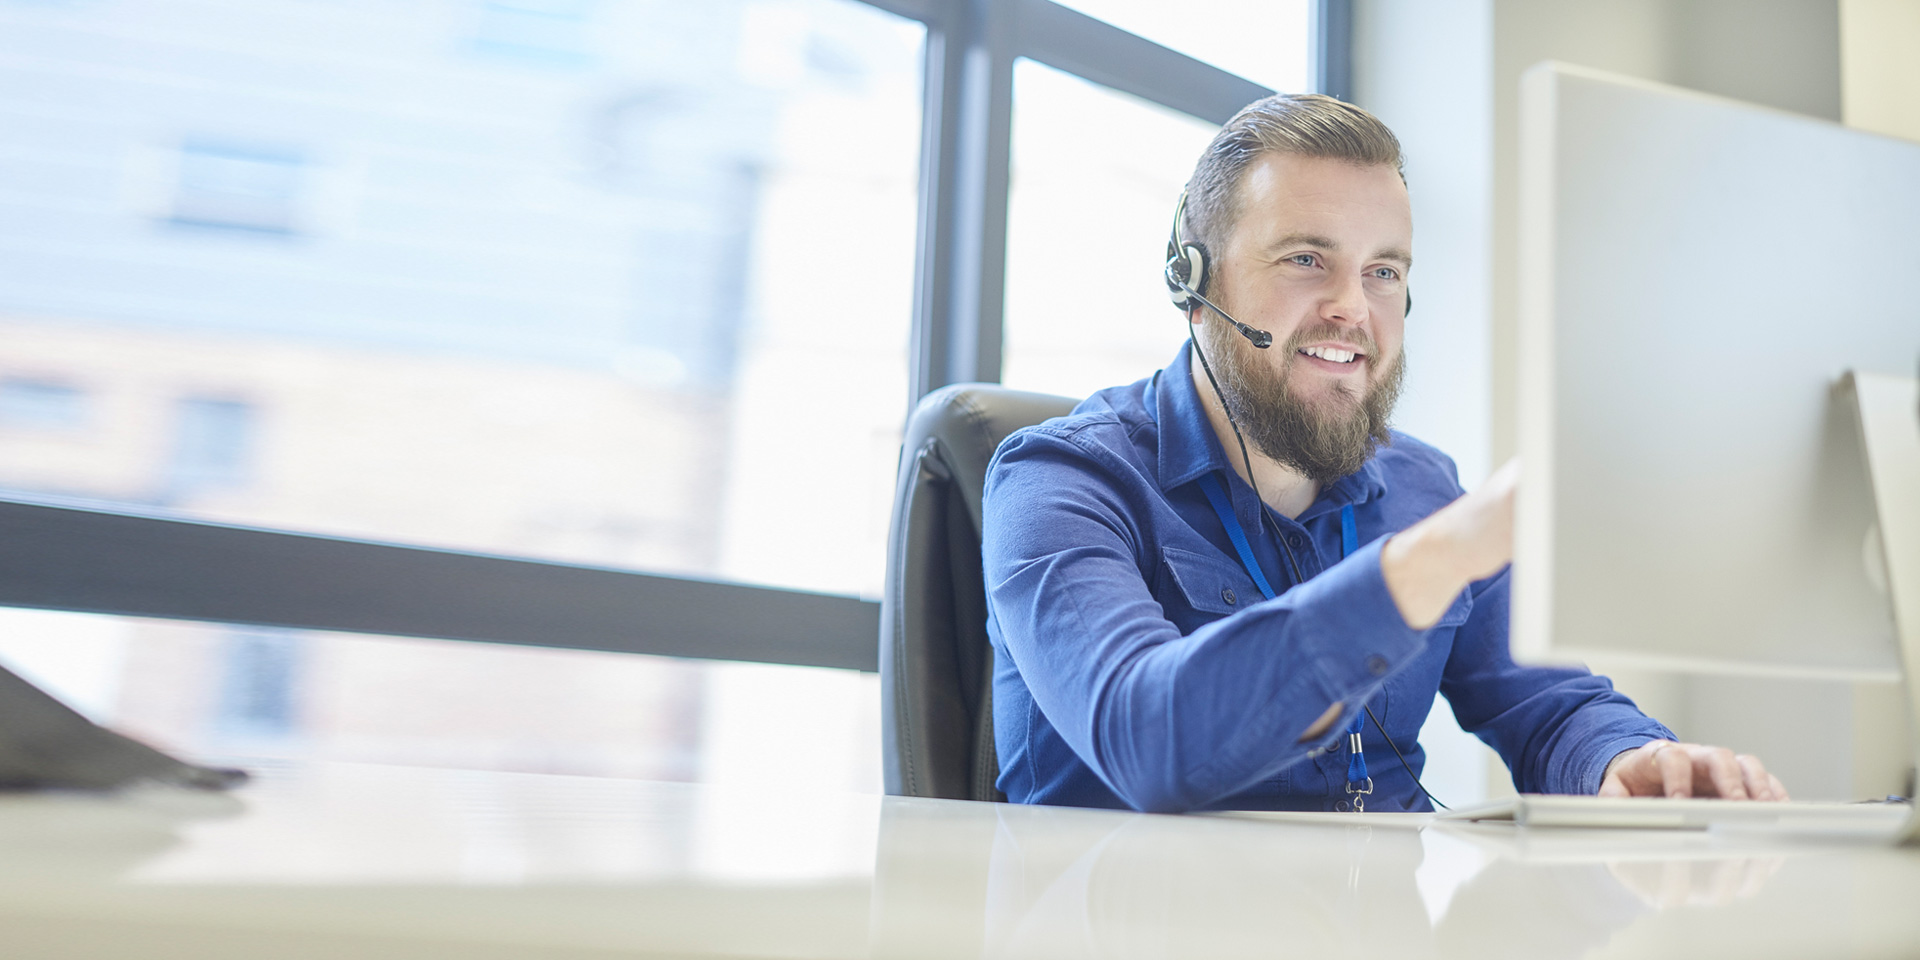 A customer service associate on a call with a client